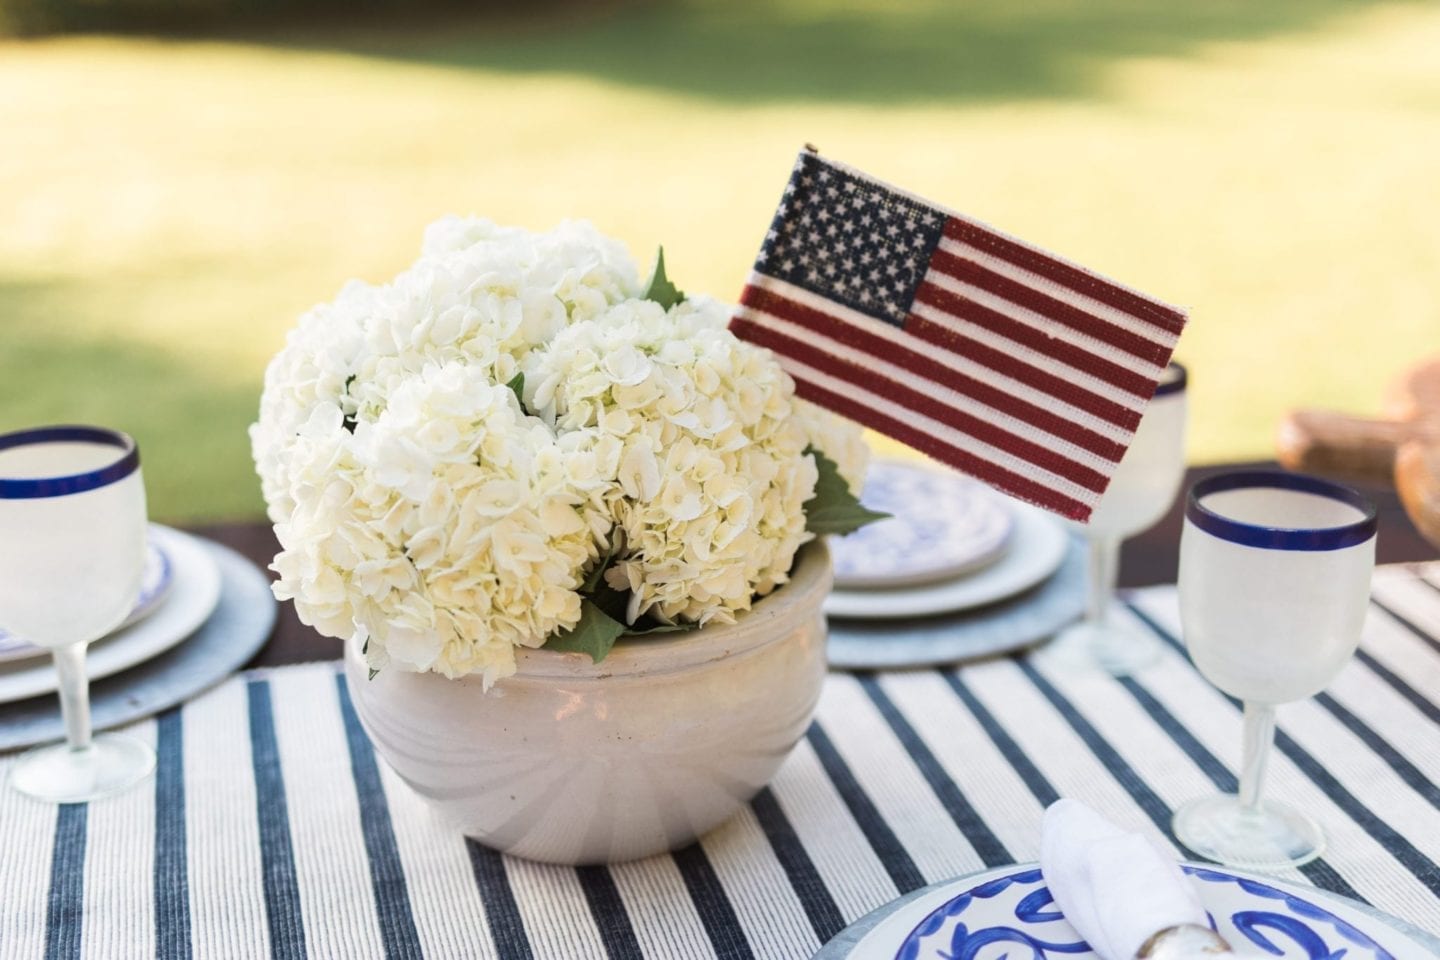 Patriotic decorations. July 4th centerpiece with white hydrangeas and American flag flower display.